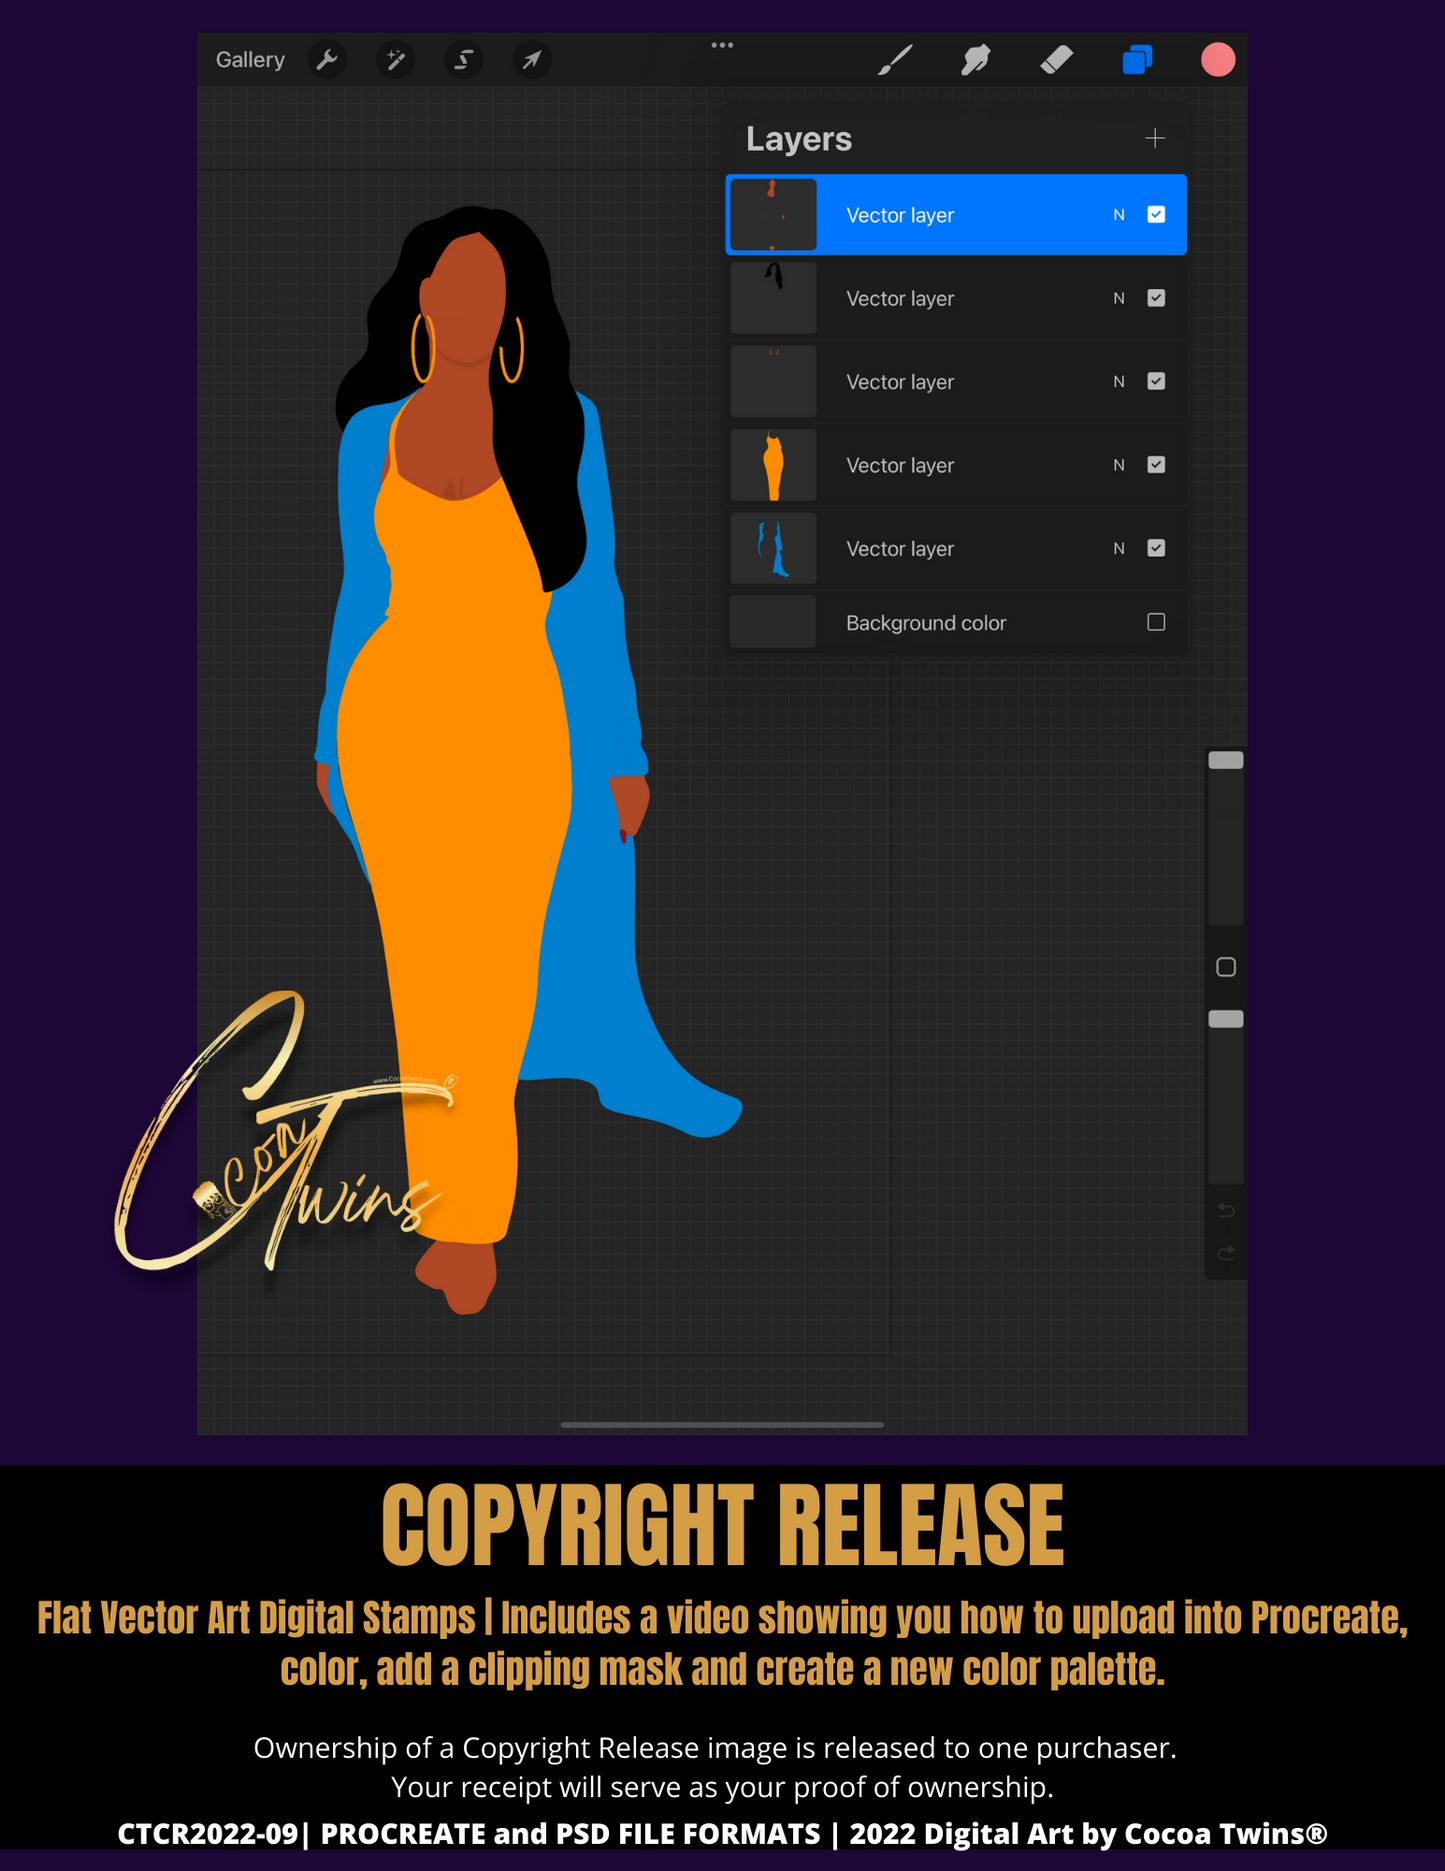 CTCR2022-09 | Copyright Release | A Digital Stamp for Use with Procreate, Adobe Fresco and/or Adobe Photoshop | 2022